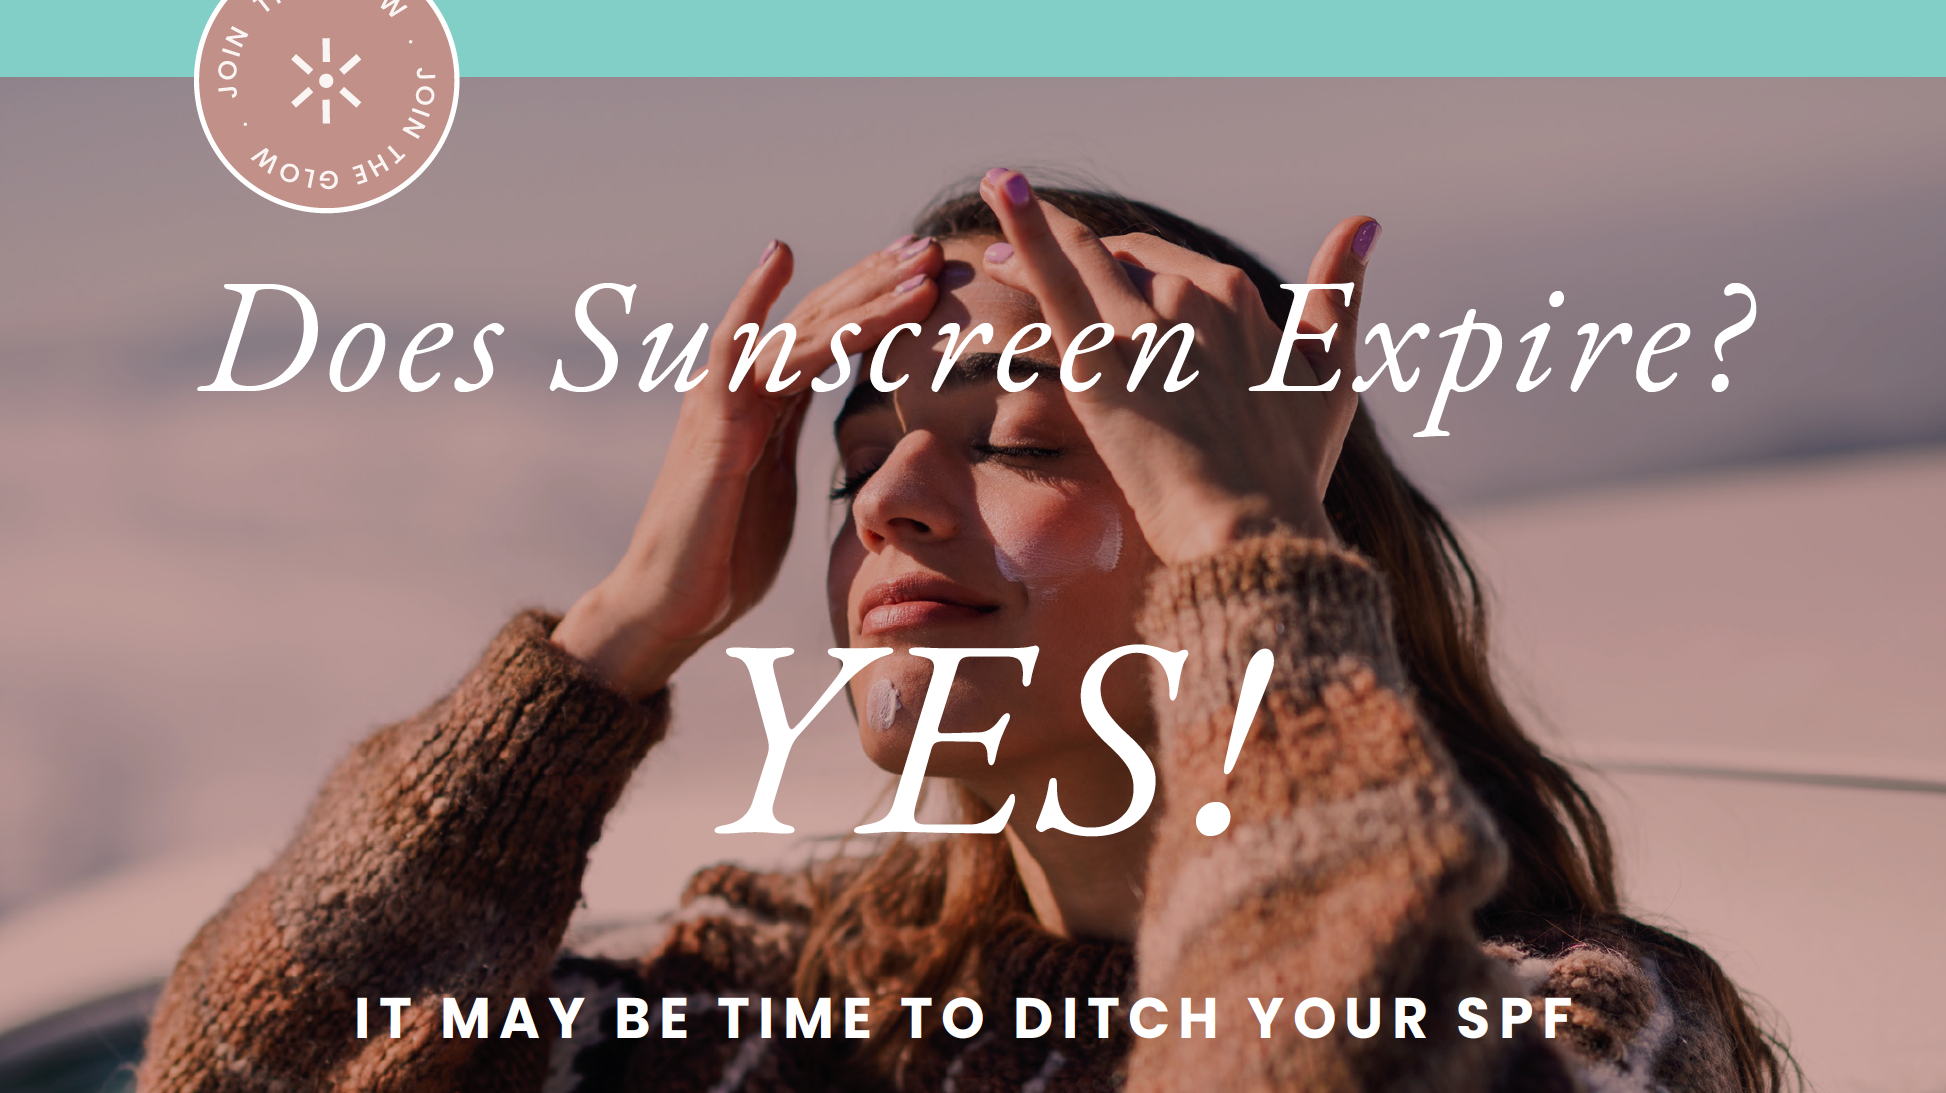 Is it Time to Ditch Your Old SPF? It Might Be!